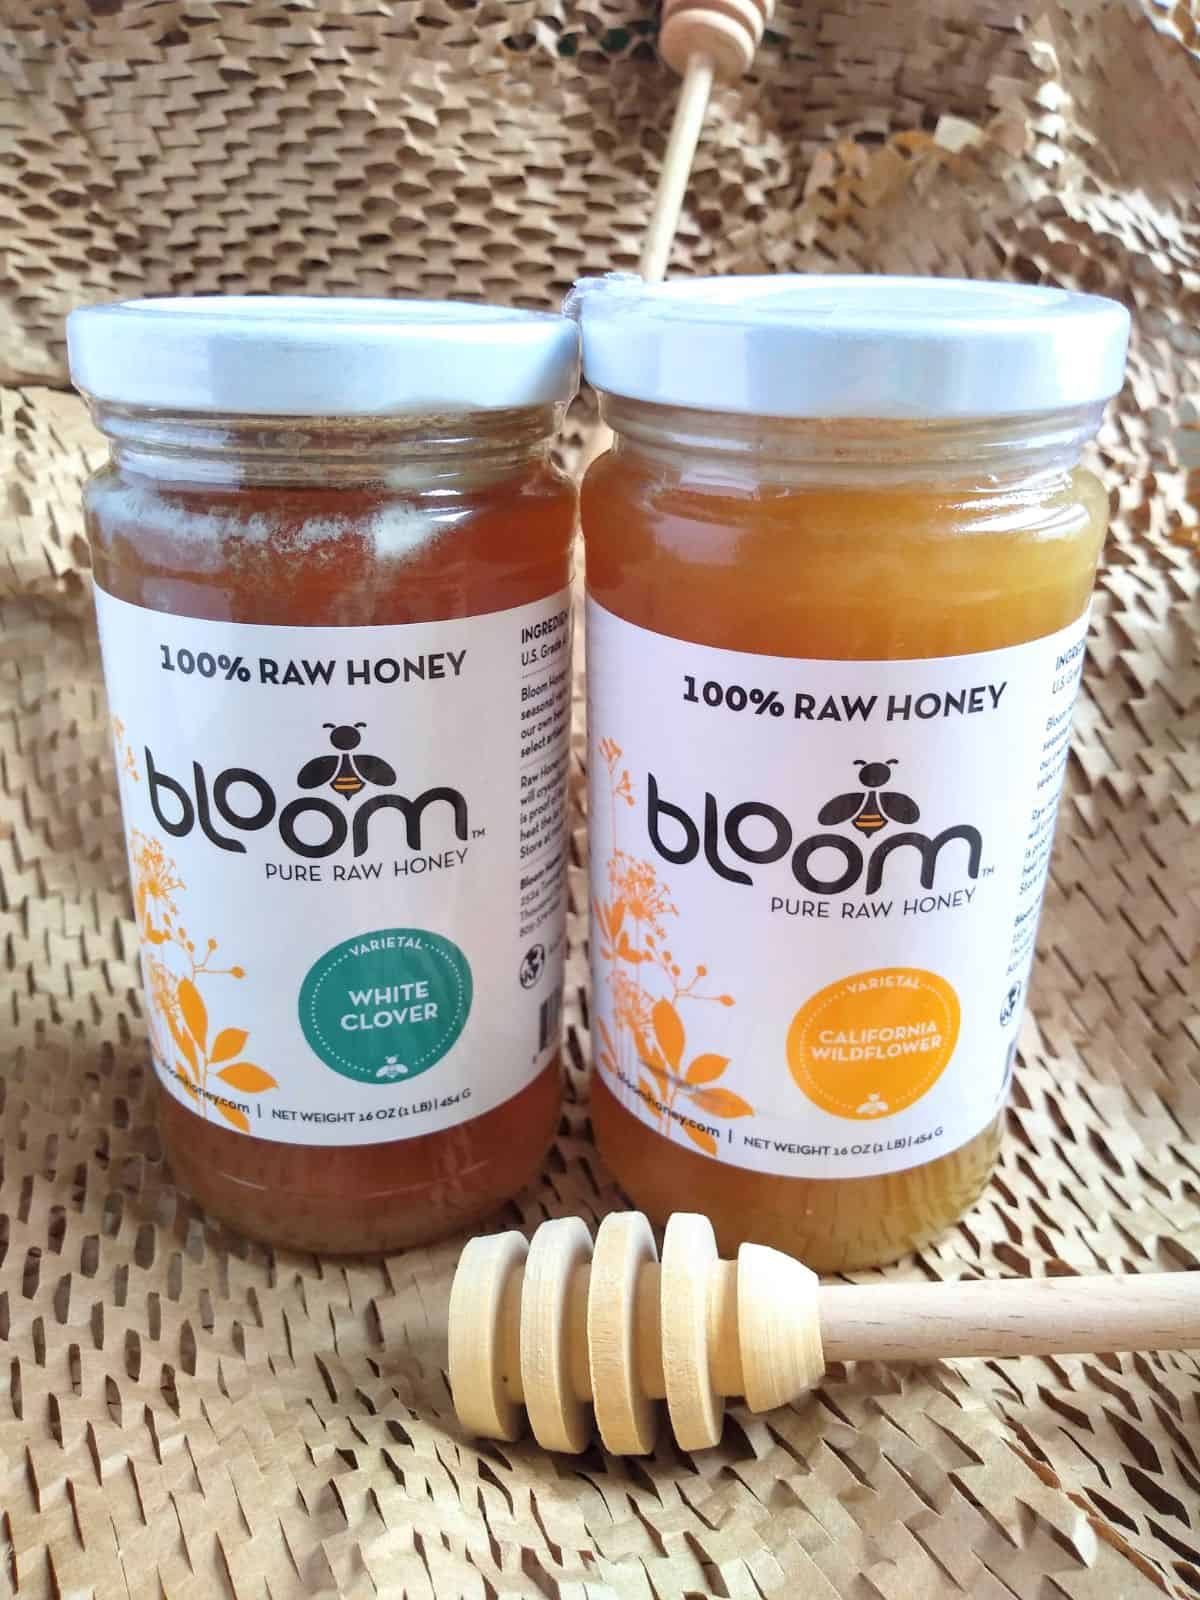 Bloom 100% Raw Honey Jars - on the left White clover and on the right - California Wildflower